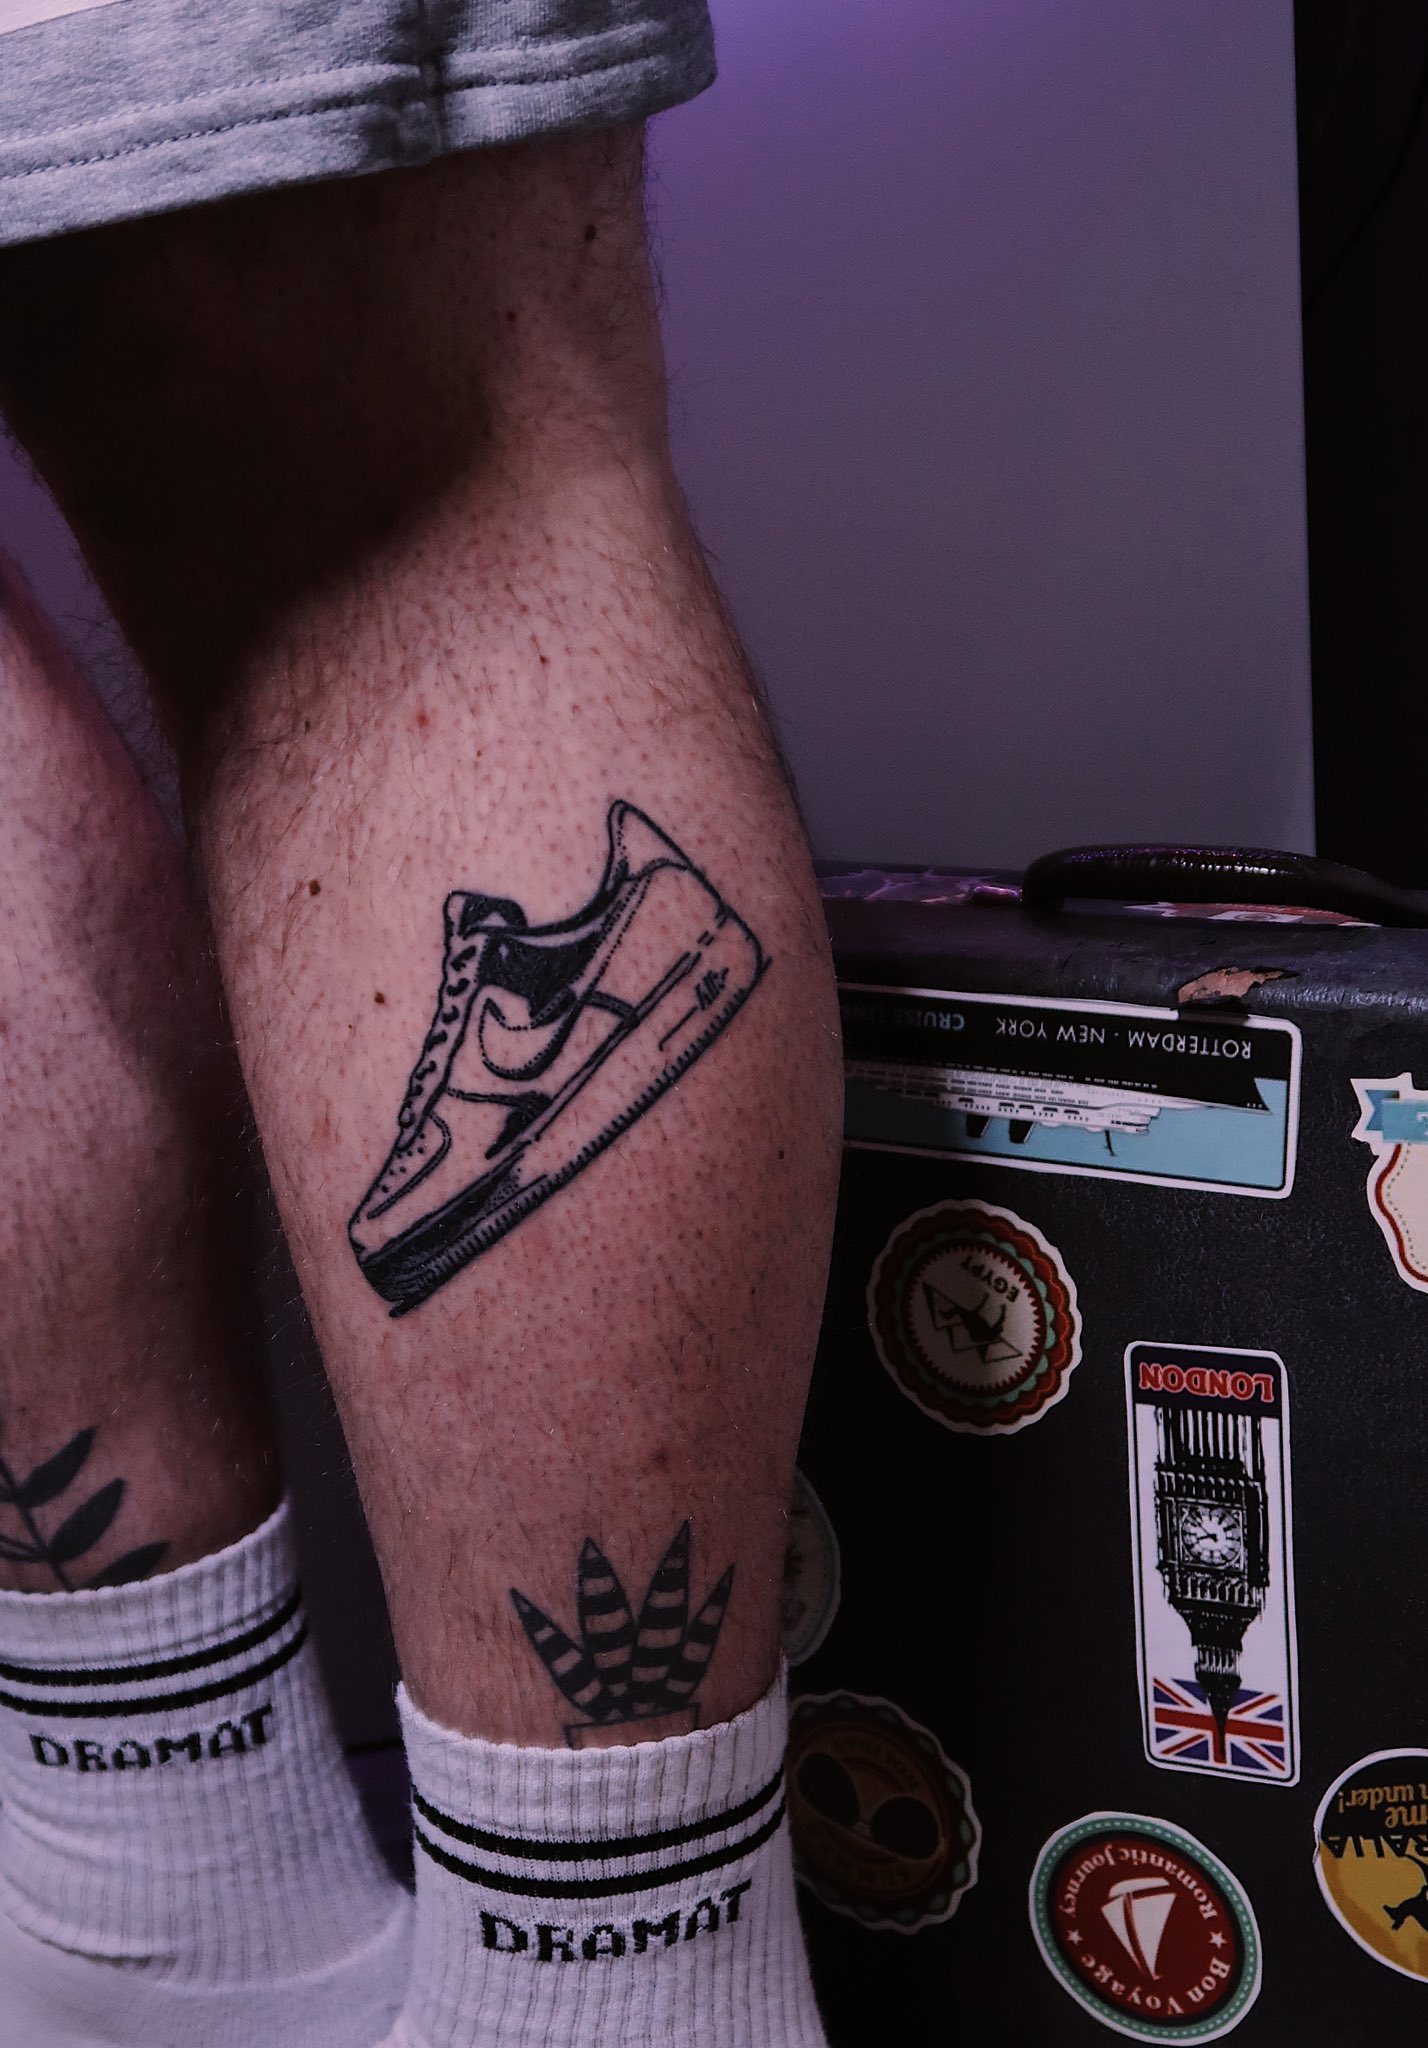 consenso Charles Keasing partes تويتر \ Jacob على تويتر: "@Nike I got Nike Air Force 1 tattoo, now I have  the best shoe forever with me! https://t.co/l6MIaWsmlP"